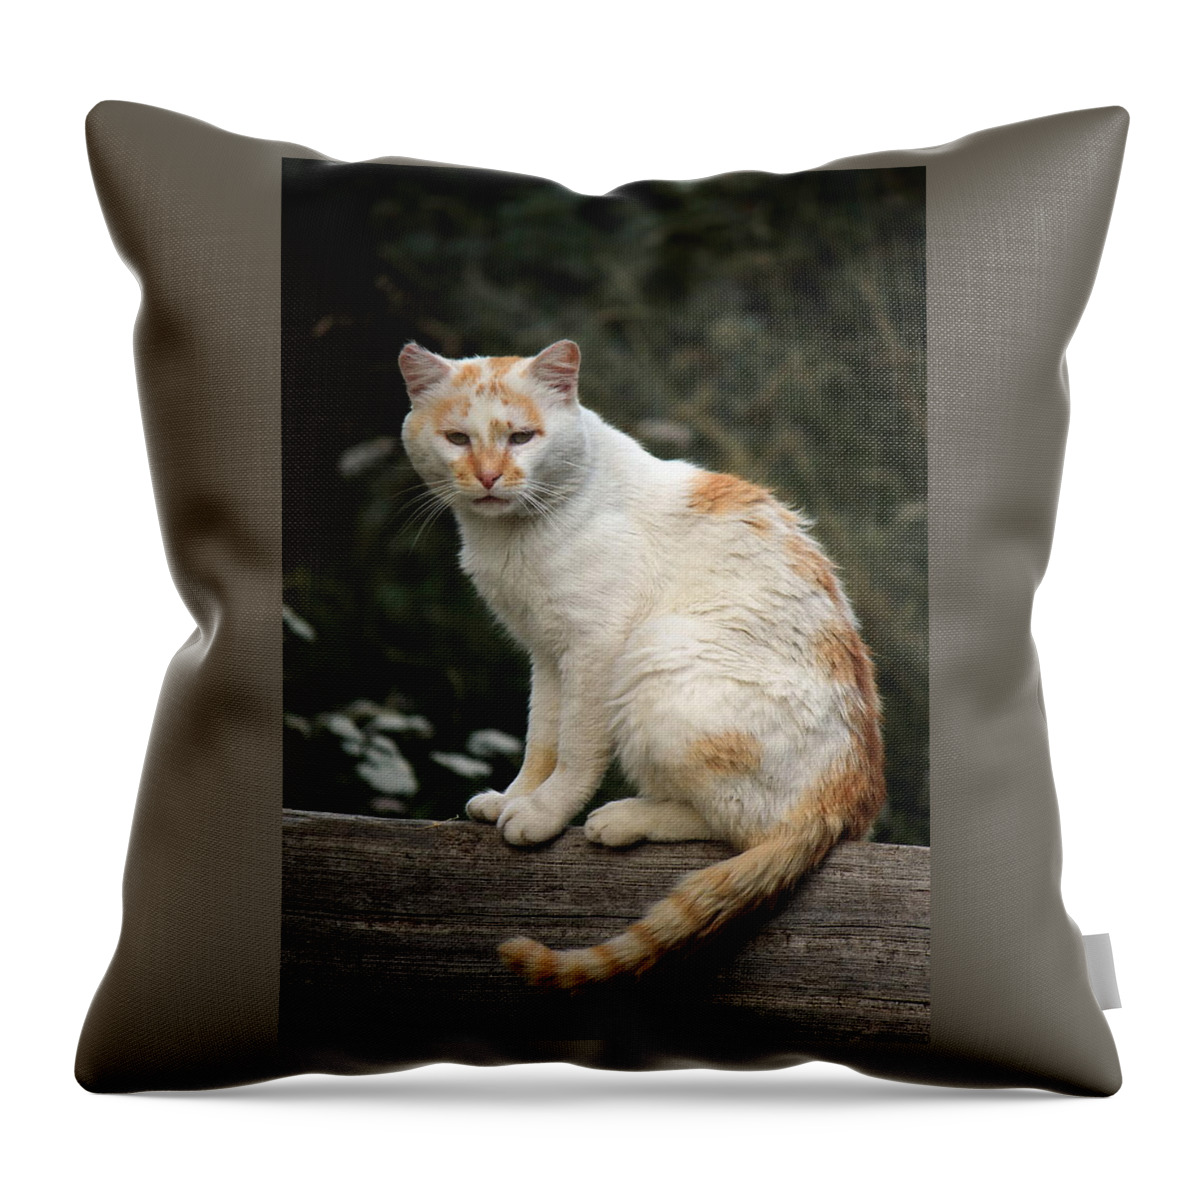 Animal Throw Pillow featuring the photograph Peaceful cat by Elenarts - Elena Duvernay photo